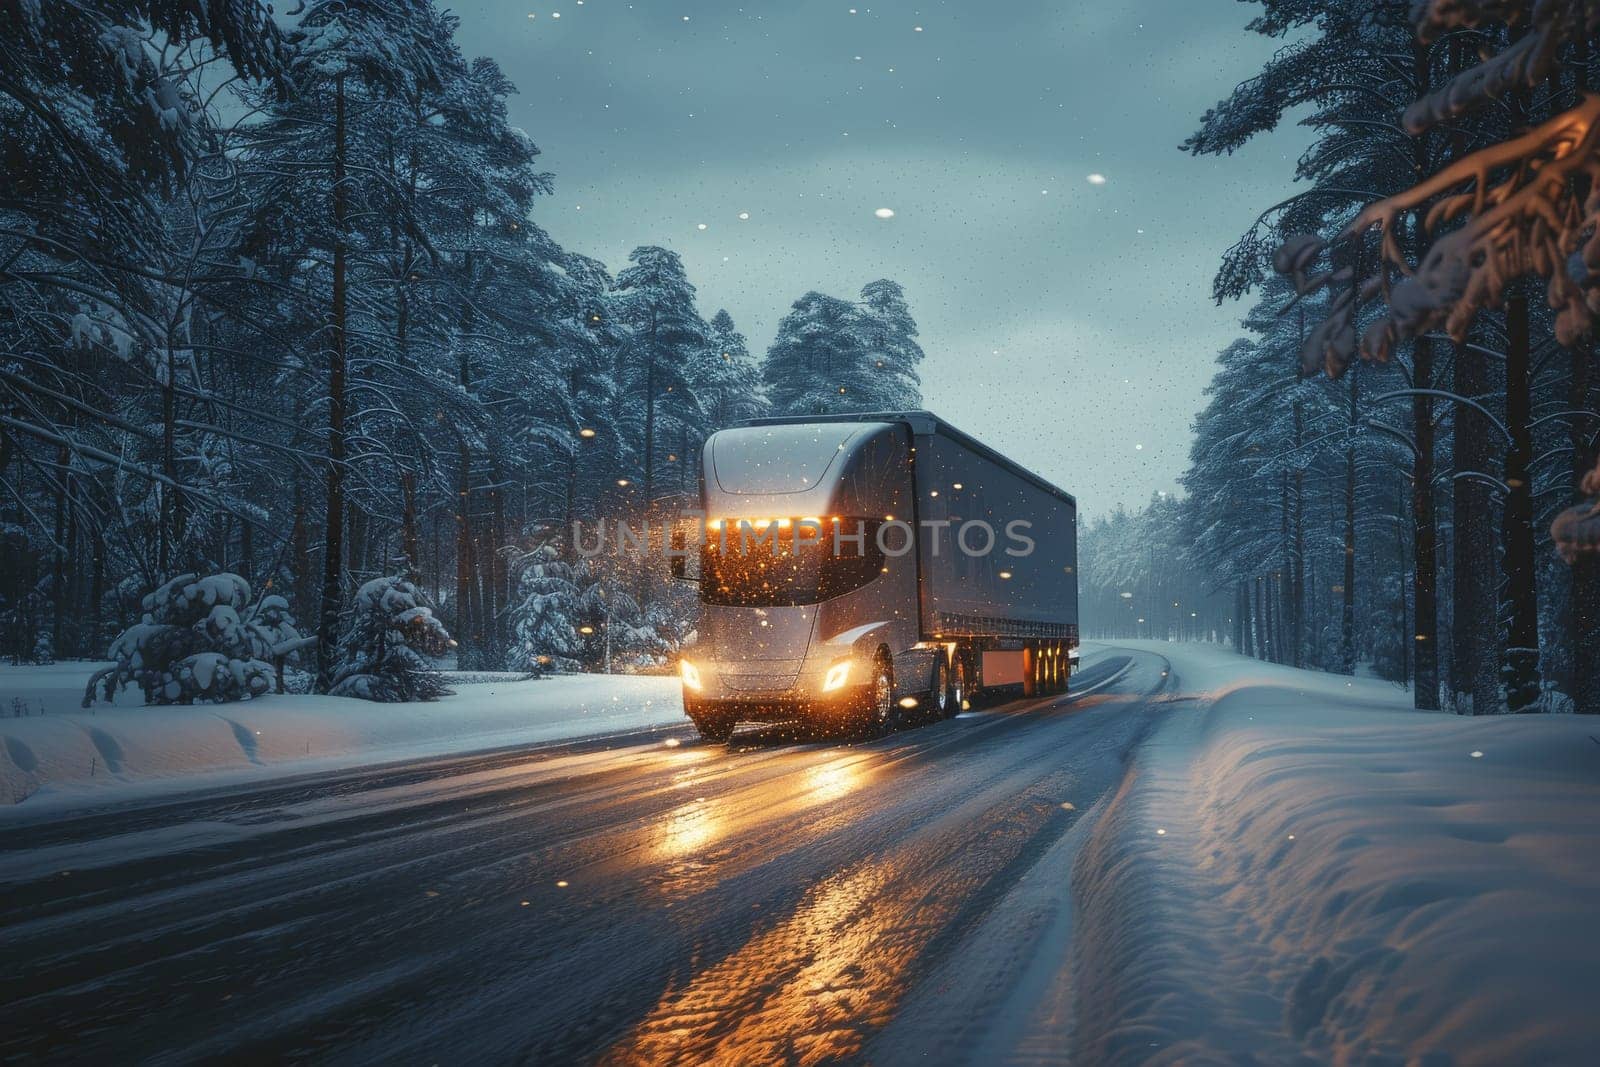 A large semi truck is driving down a snowy road. The truck is surrounded by trees and the sky is cloudy. The scene is dark and the truck is the only source of light